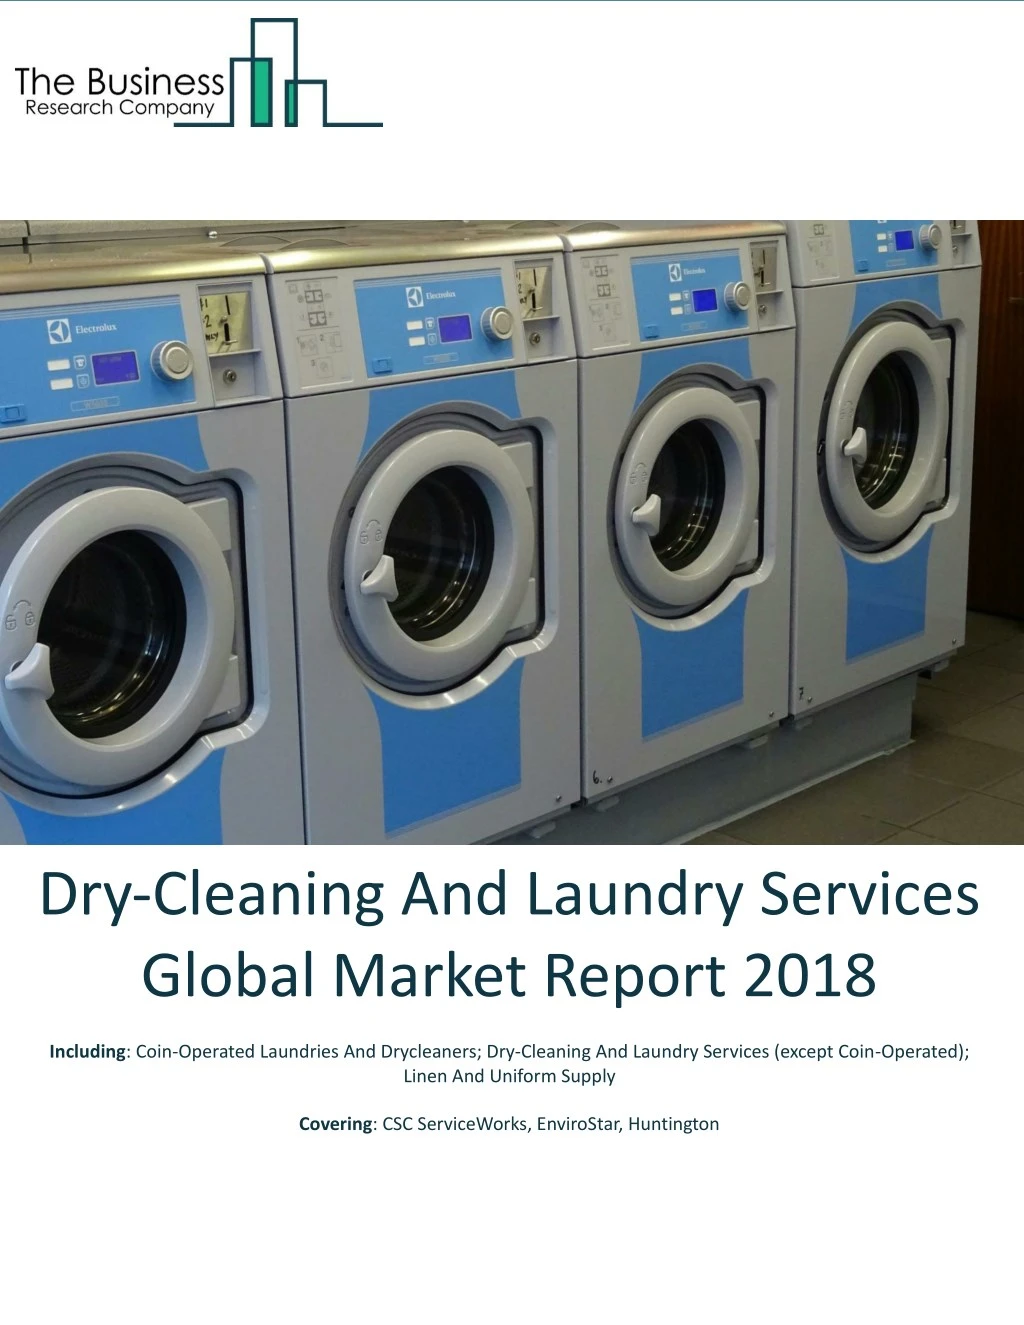 dry cleaning and laundry services global market